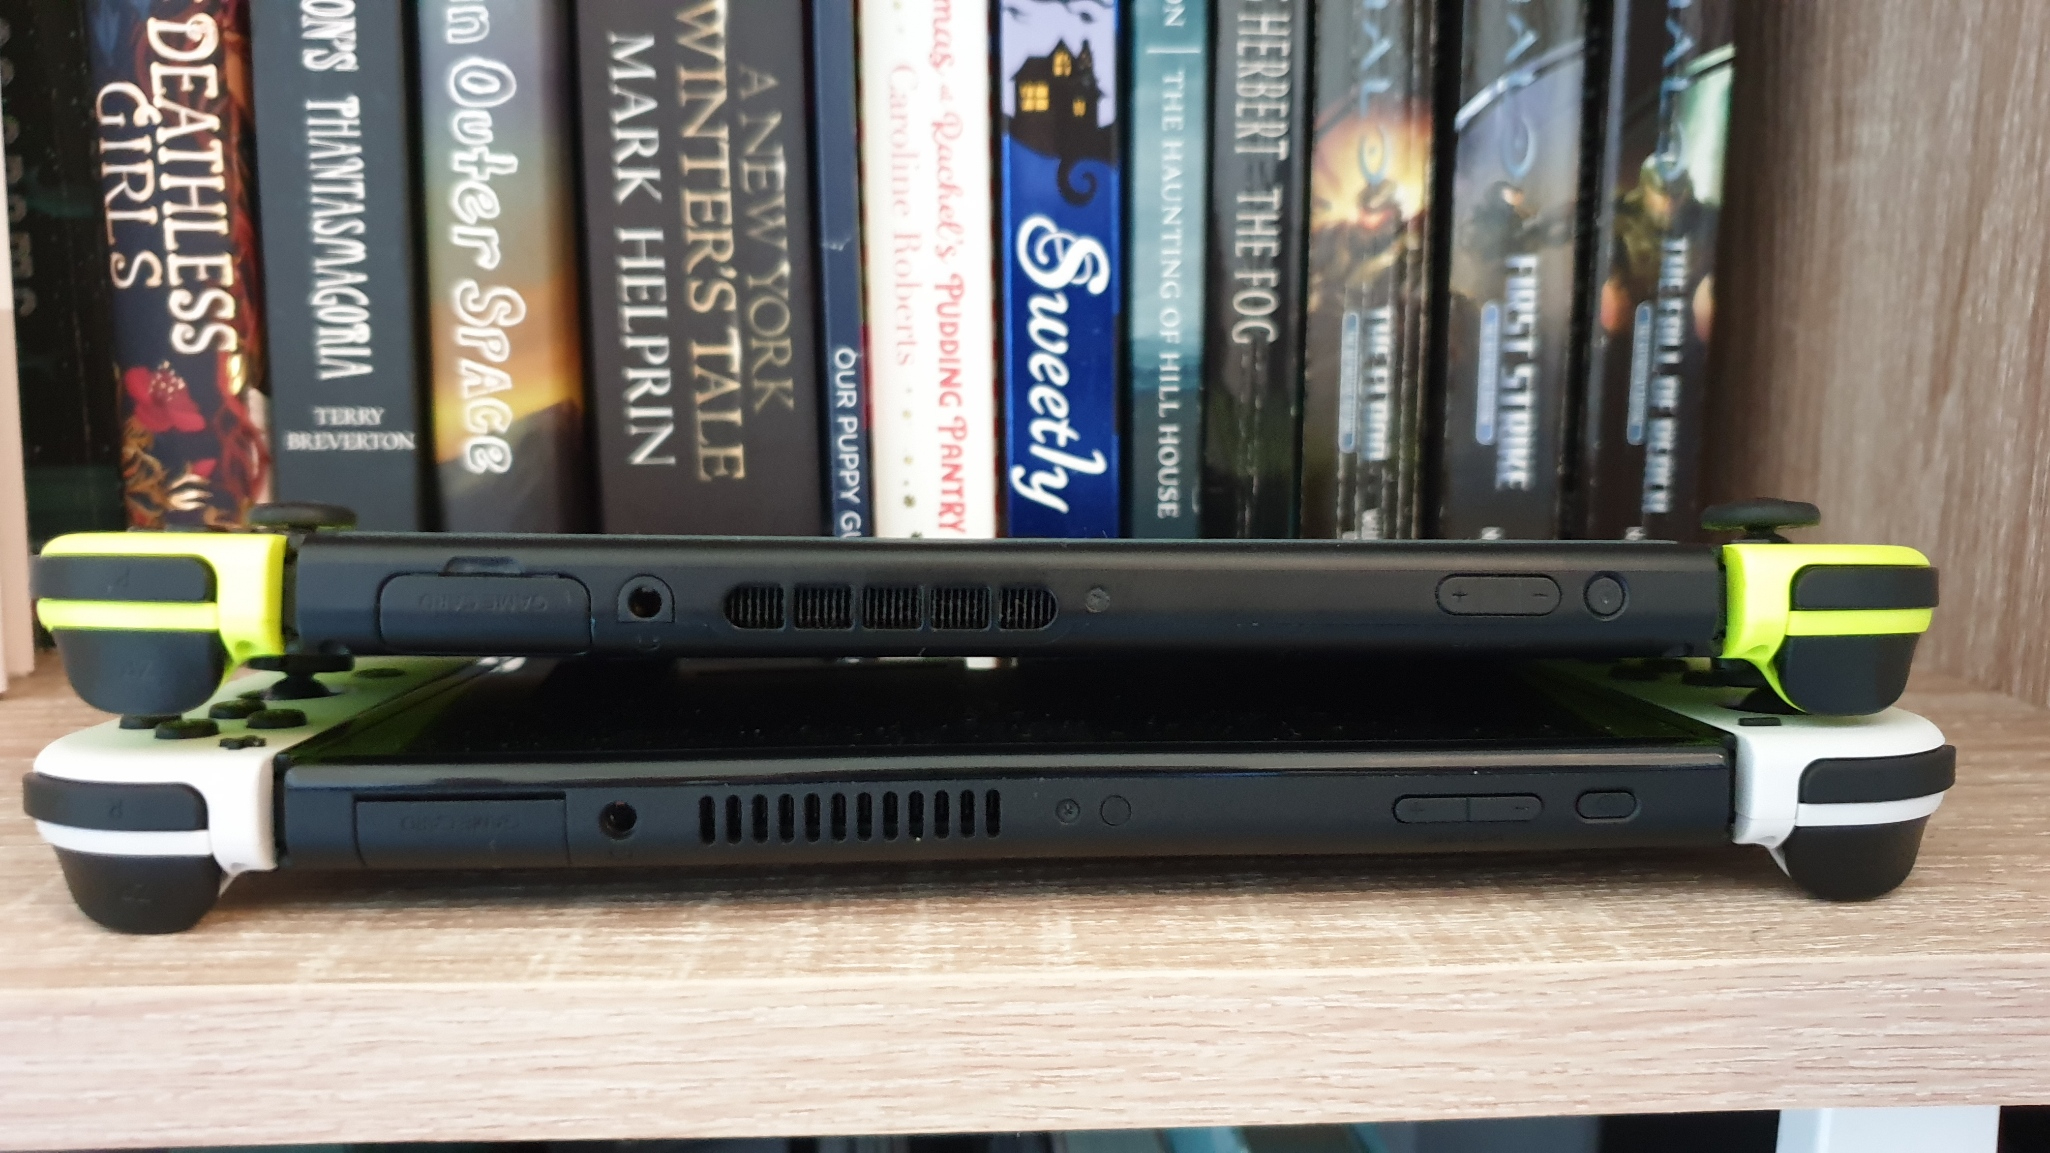 Nintendo Switch OLED stacked on top of the older Switch